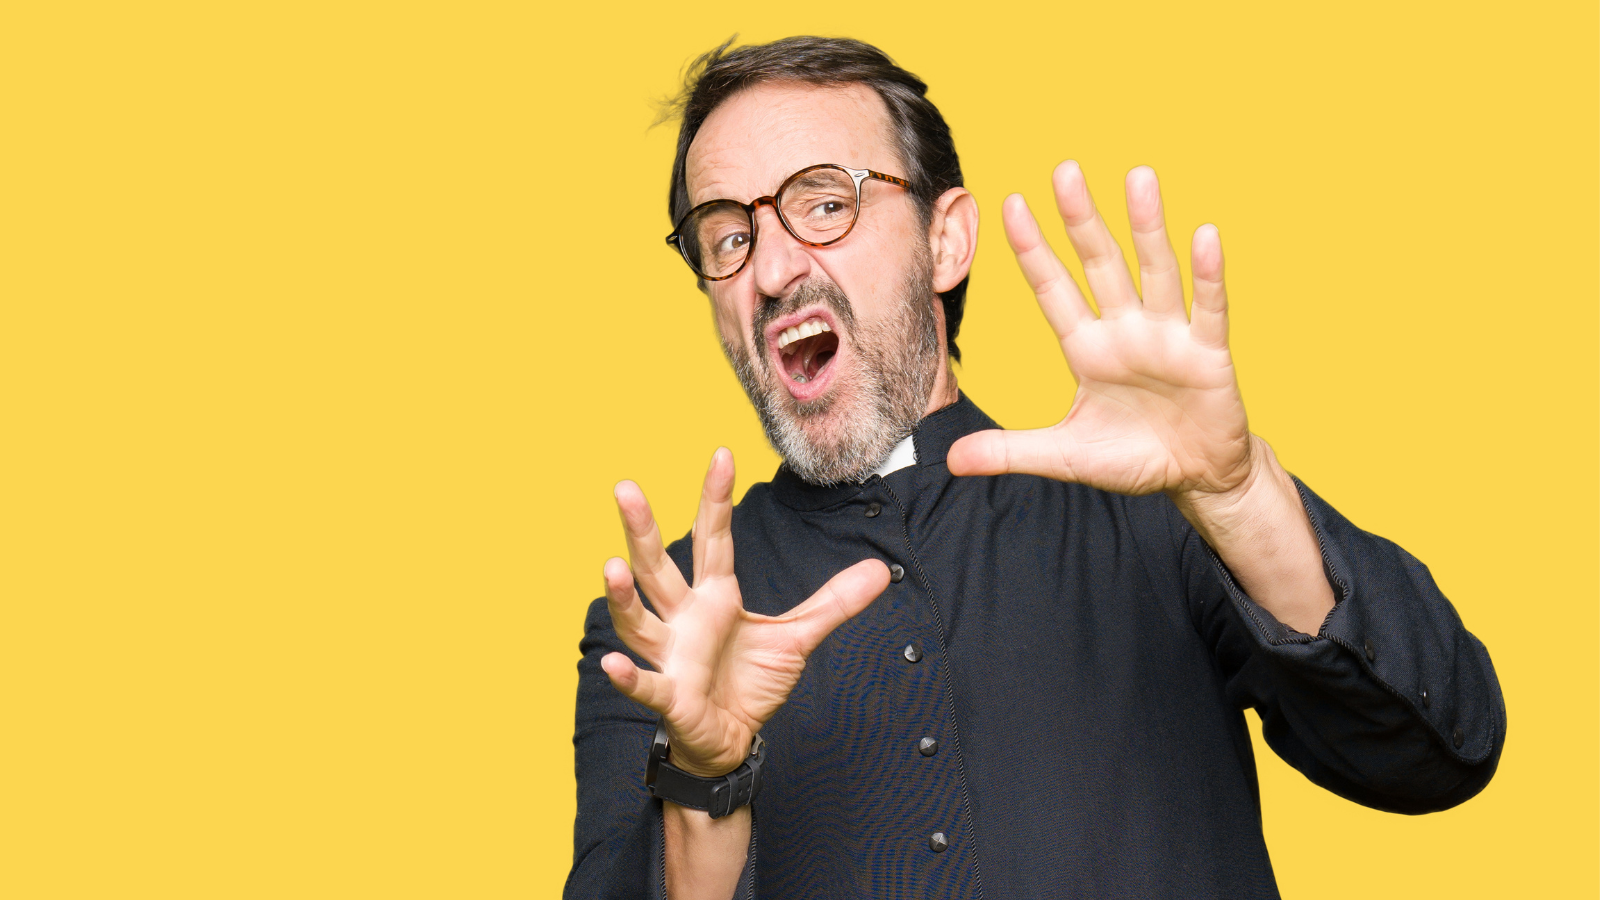 A pastor with his hands up, looking like he doesn't agree with what someone is doing, with a yellow background.